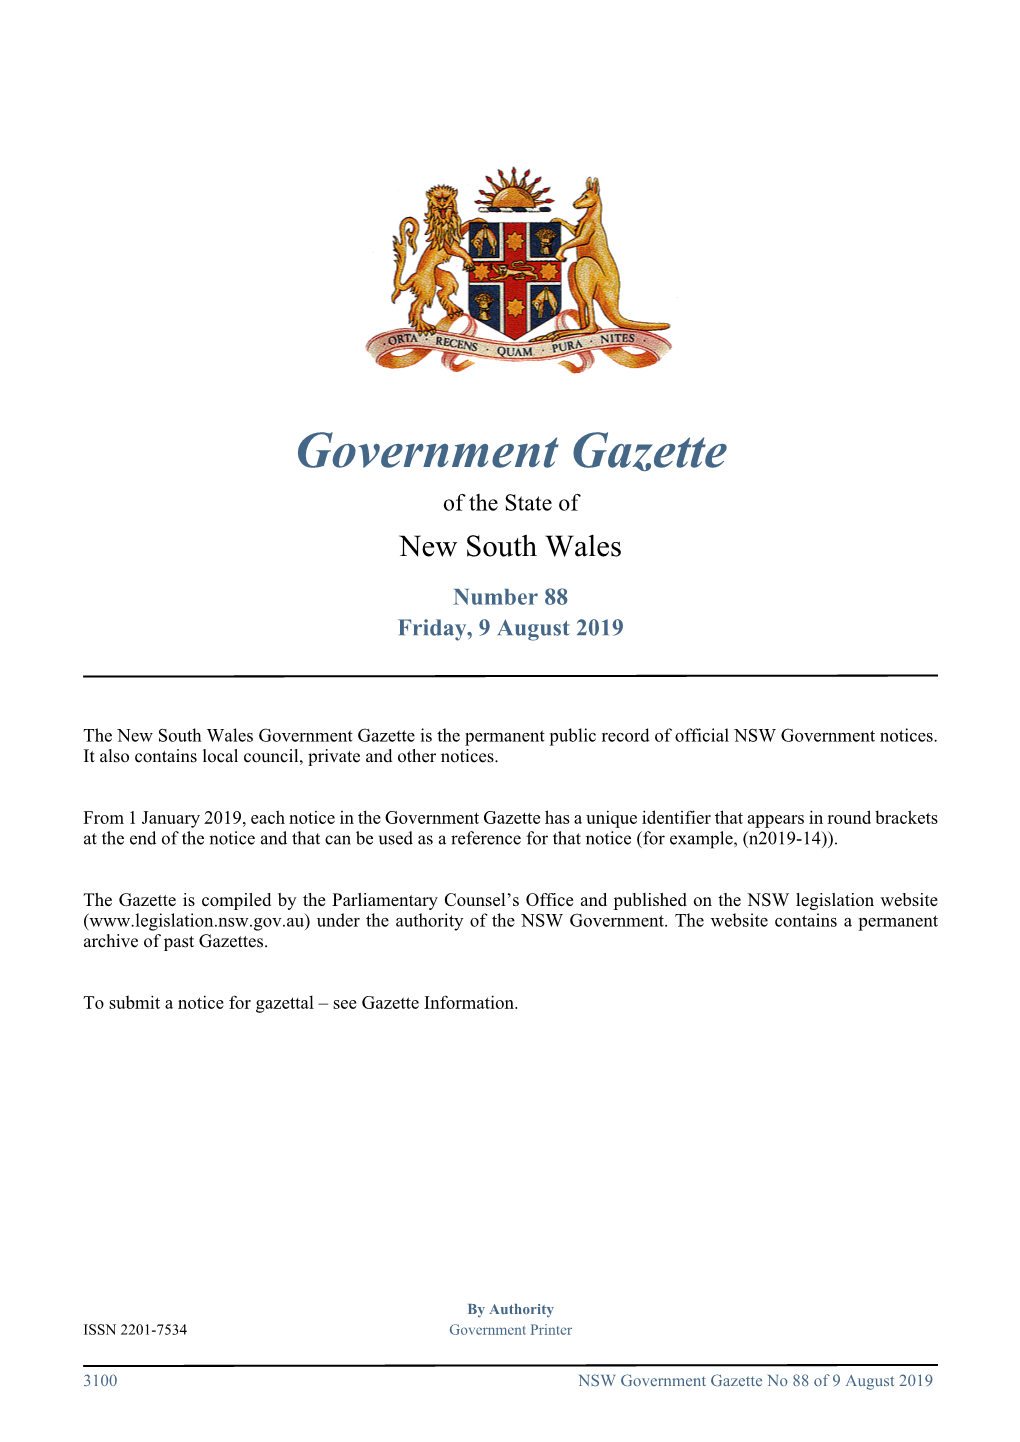 Government Gazette No 88 of Friday 9 August 2019